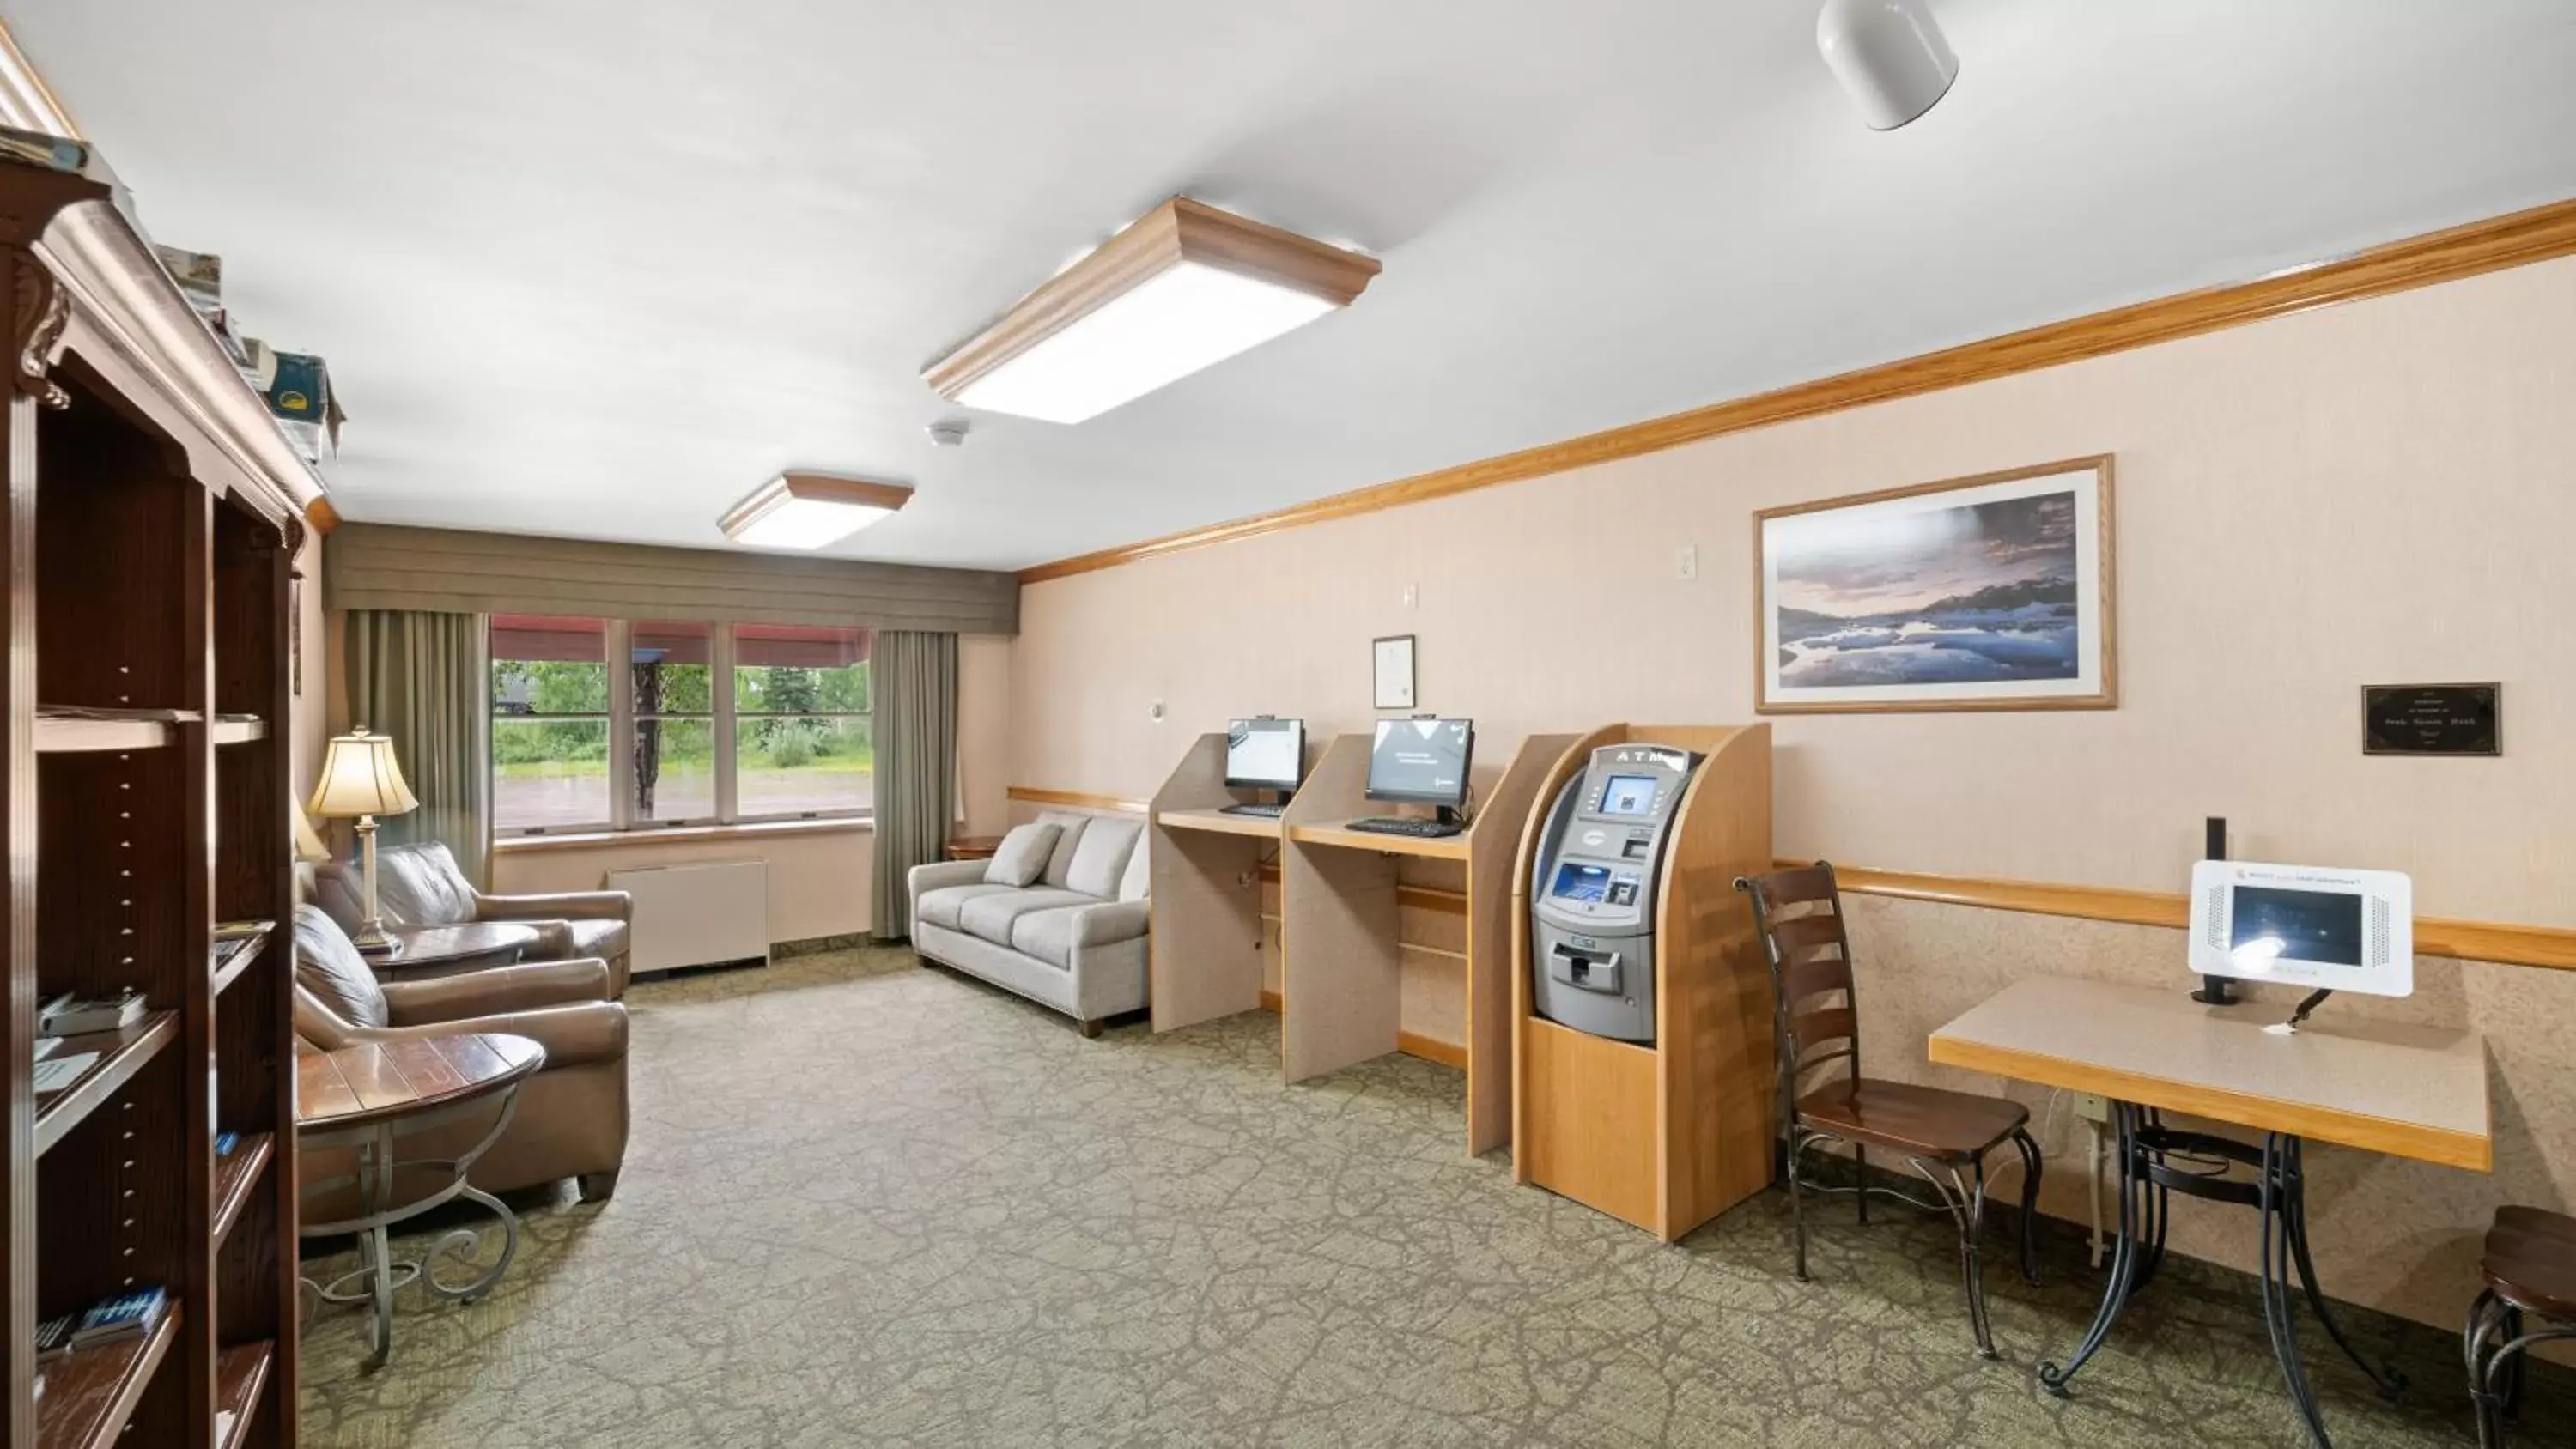 Business facilities in Clarion Hotel & Suites Fairbanks near Ft. Wainwright